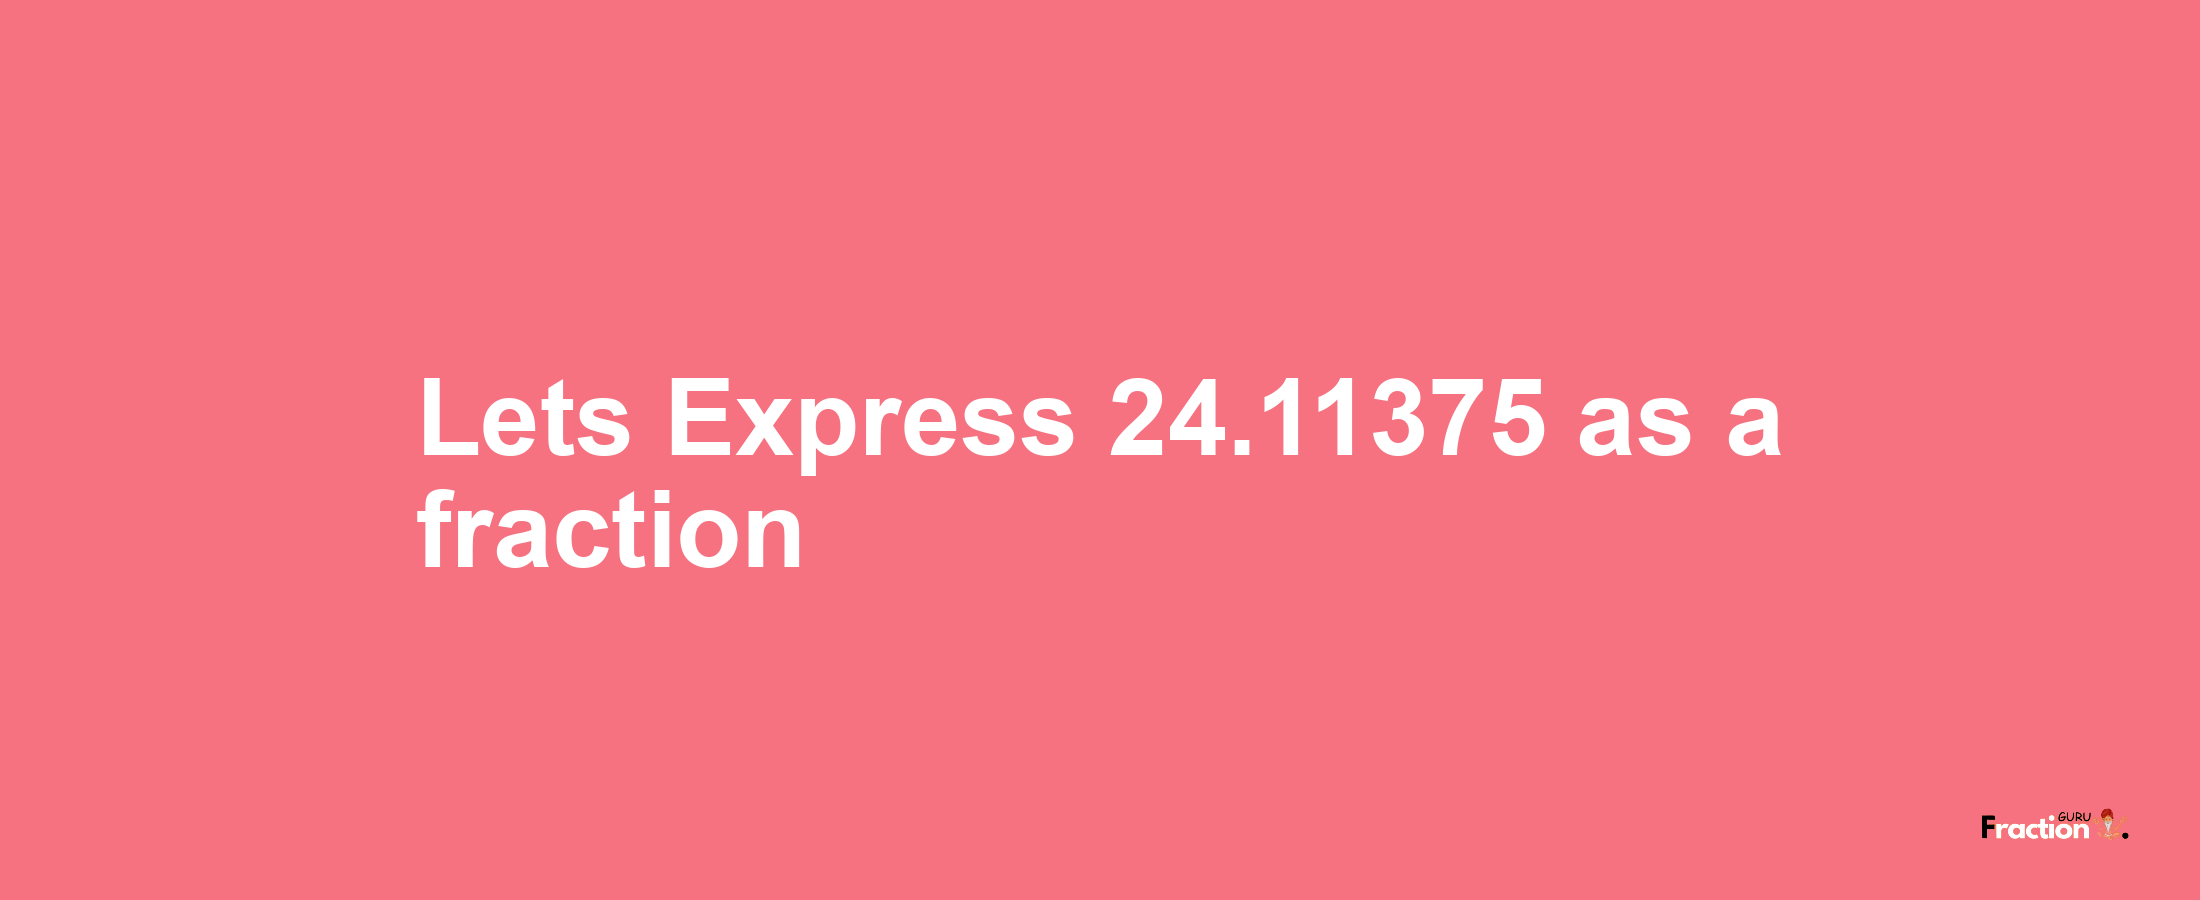 Lets Express 24.11375 as afraction